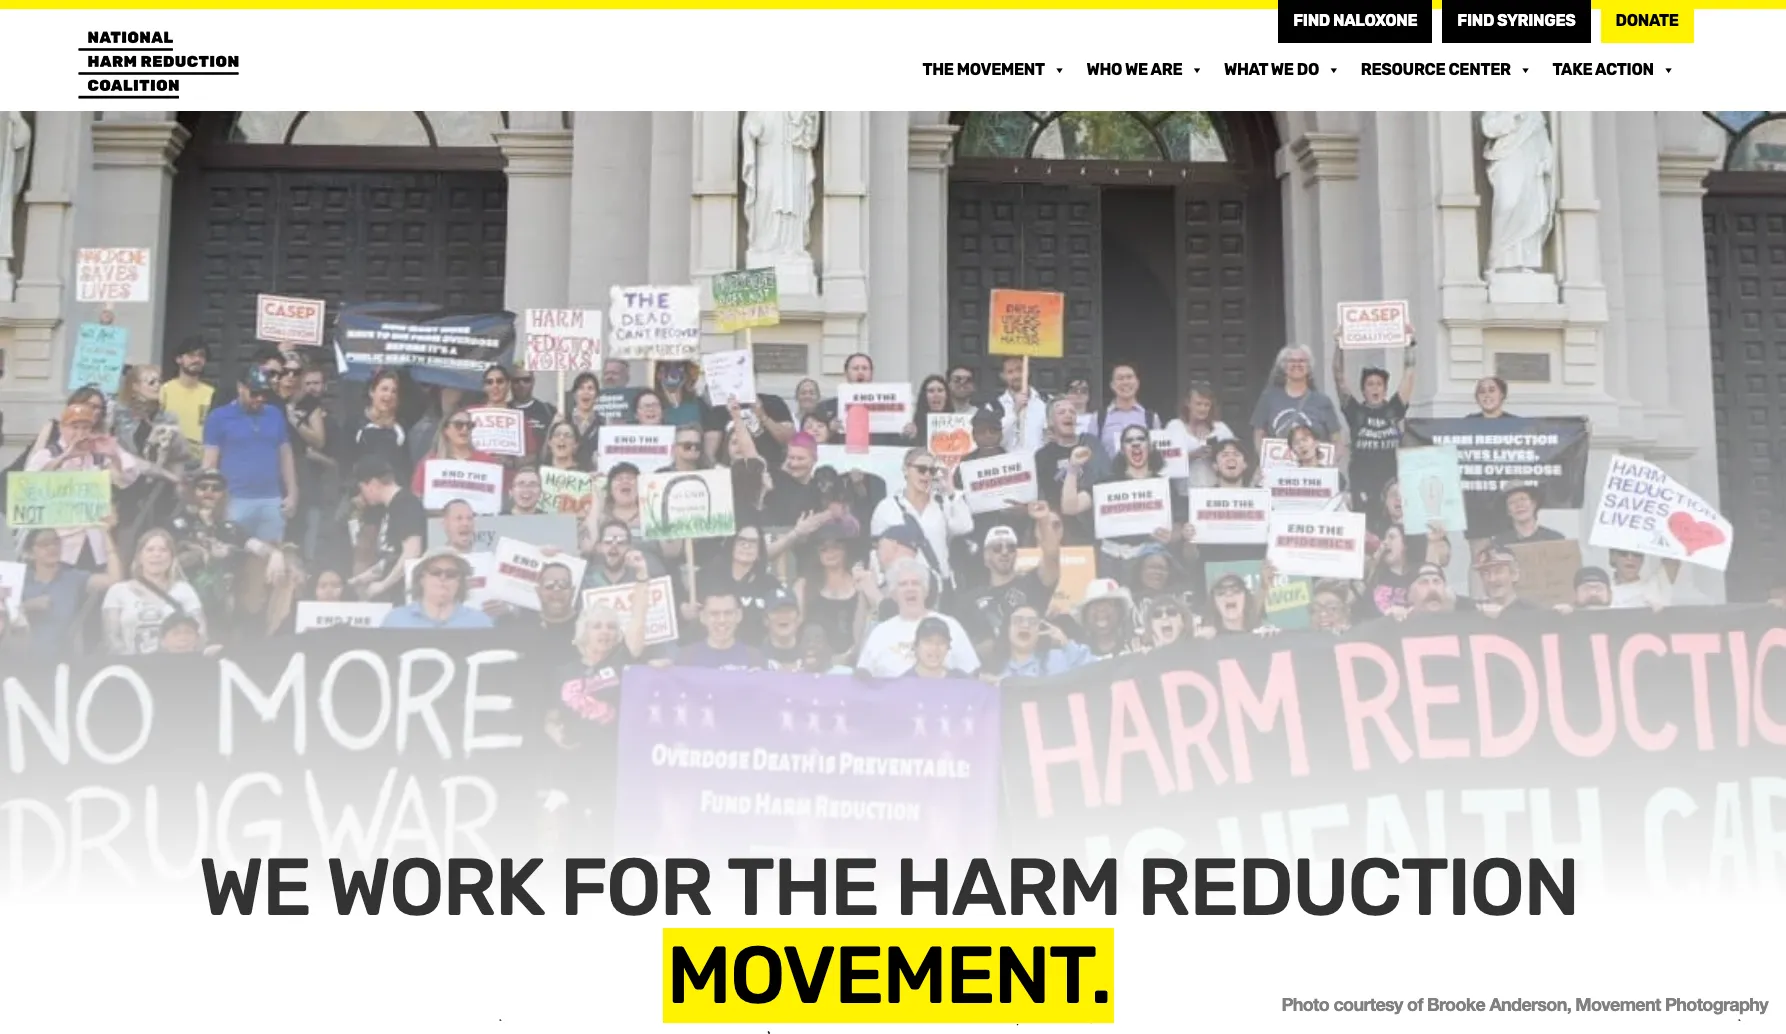 The National Harm Reduction Coalition homepage